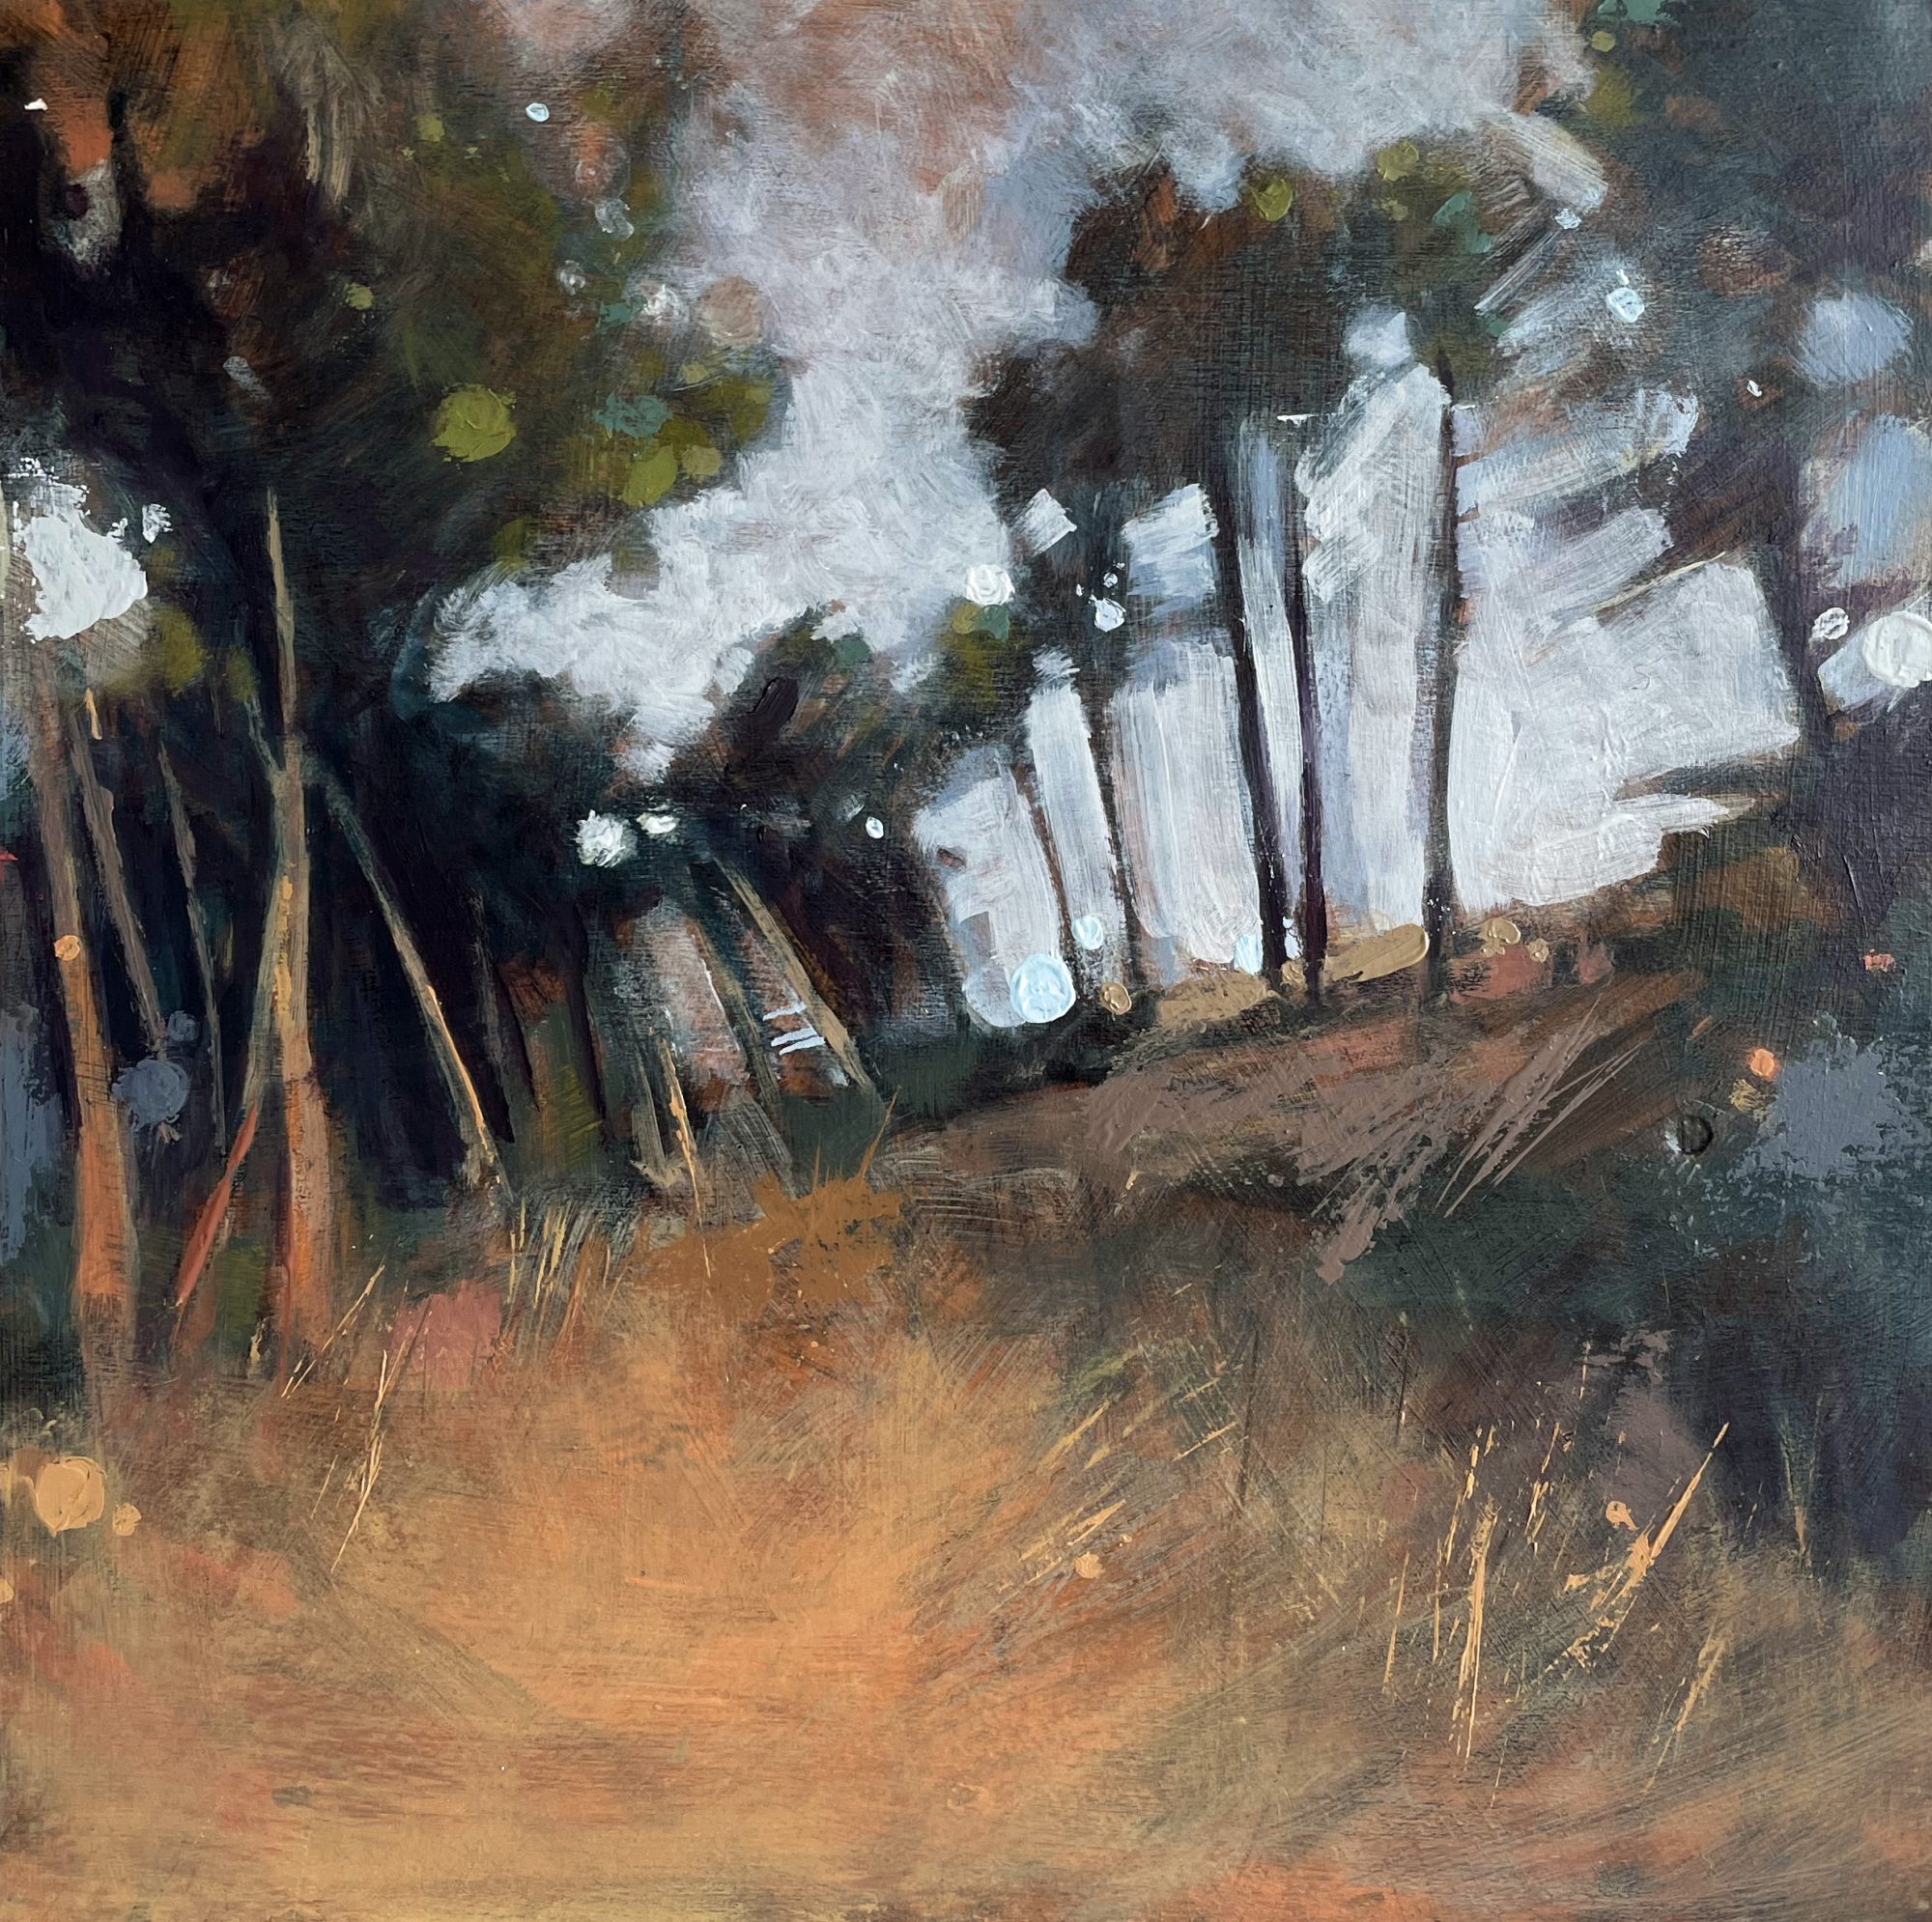 Jenny-Fermor-Spain-contempory-landscape-painting-treescapes-impressionism-abstract-landscape-oil-painting-warm-tones-mixed-media-sunlight-Yorkshire-gallery-original-art-Hope-Gallery